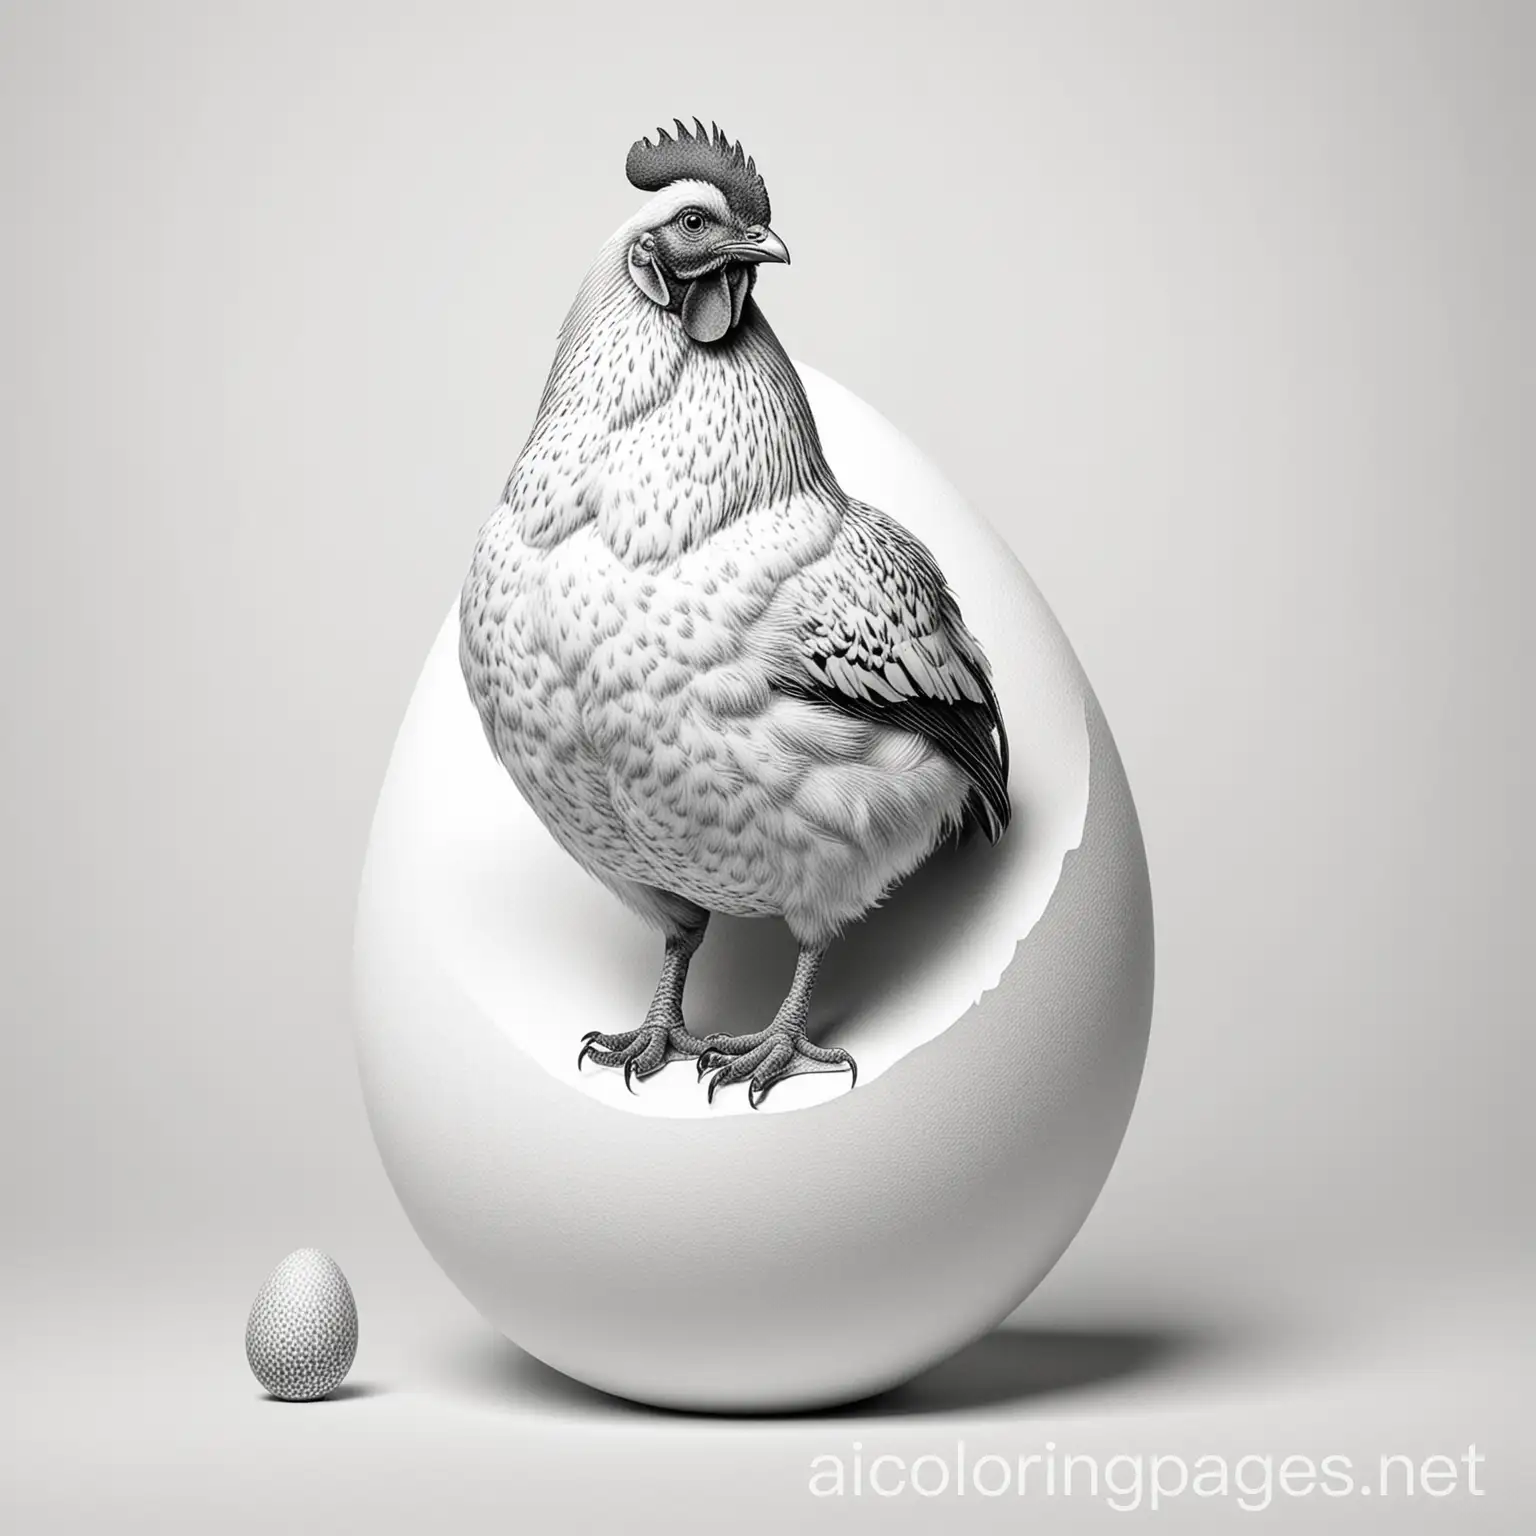 Hen-Sitting-on-Giant-Egg-Coloring-Page-Simple-Line-Art-with-Ample-White-Space